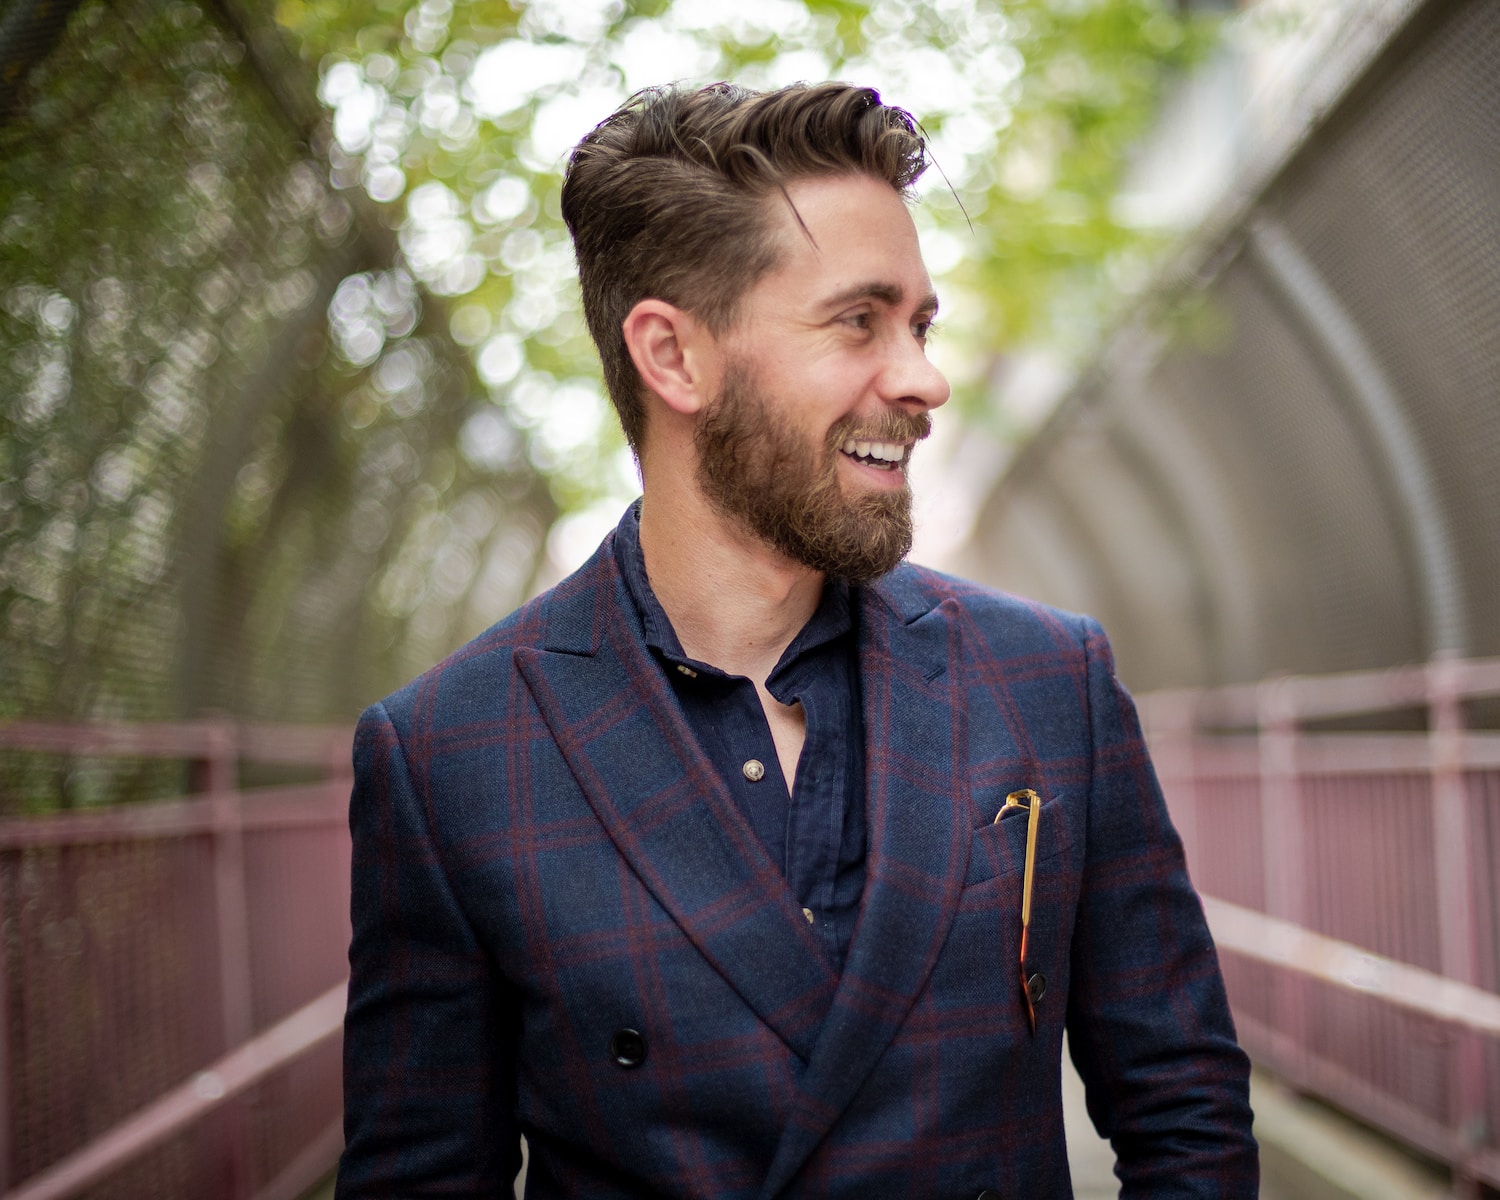 a man with a beard wearing a suit and smiling